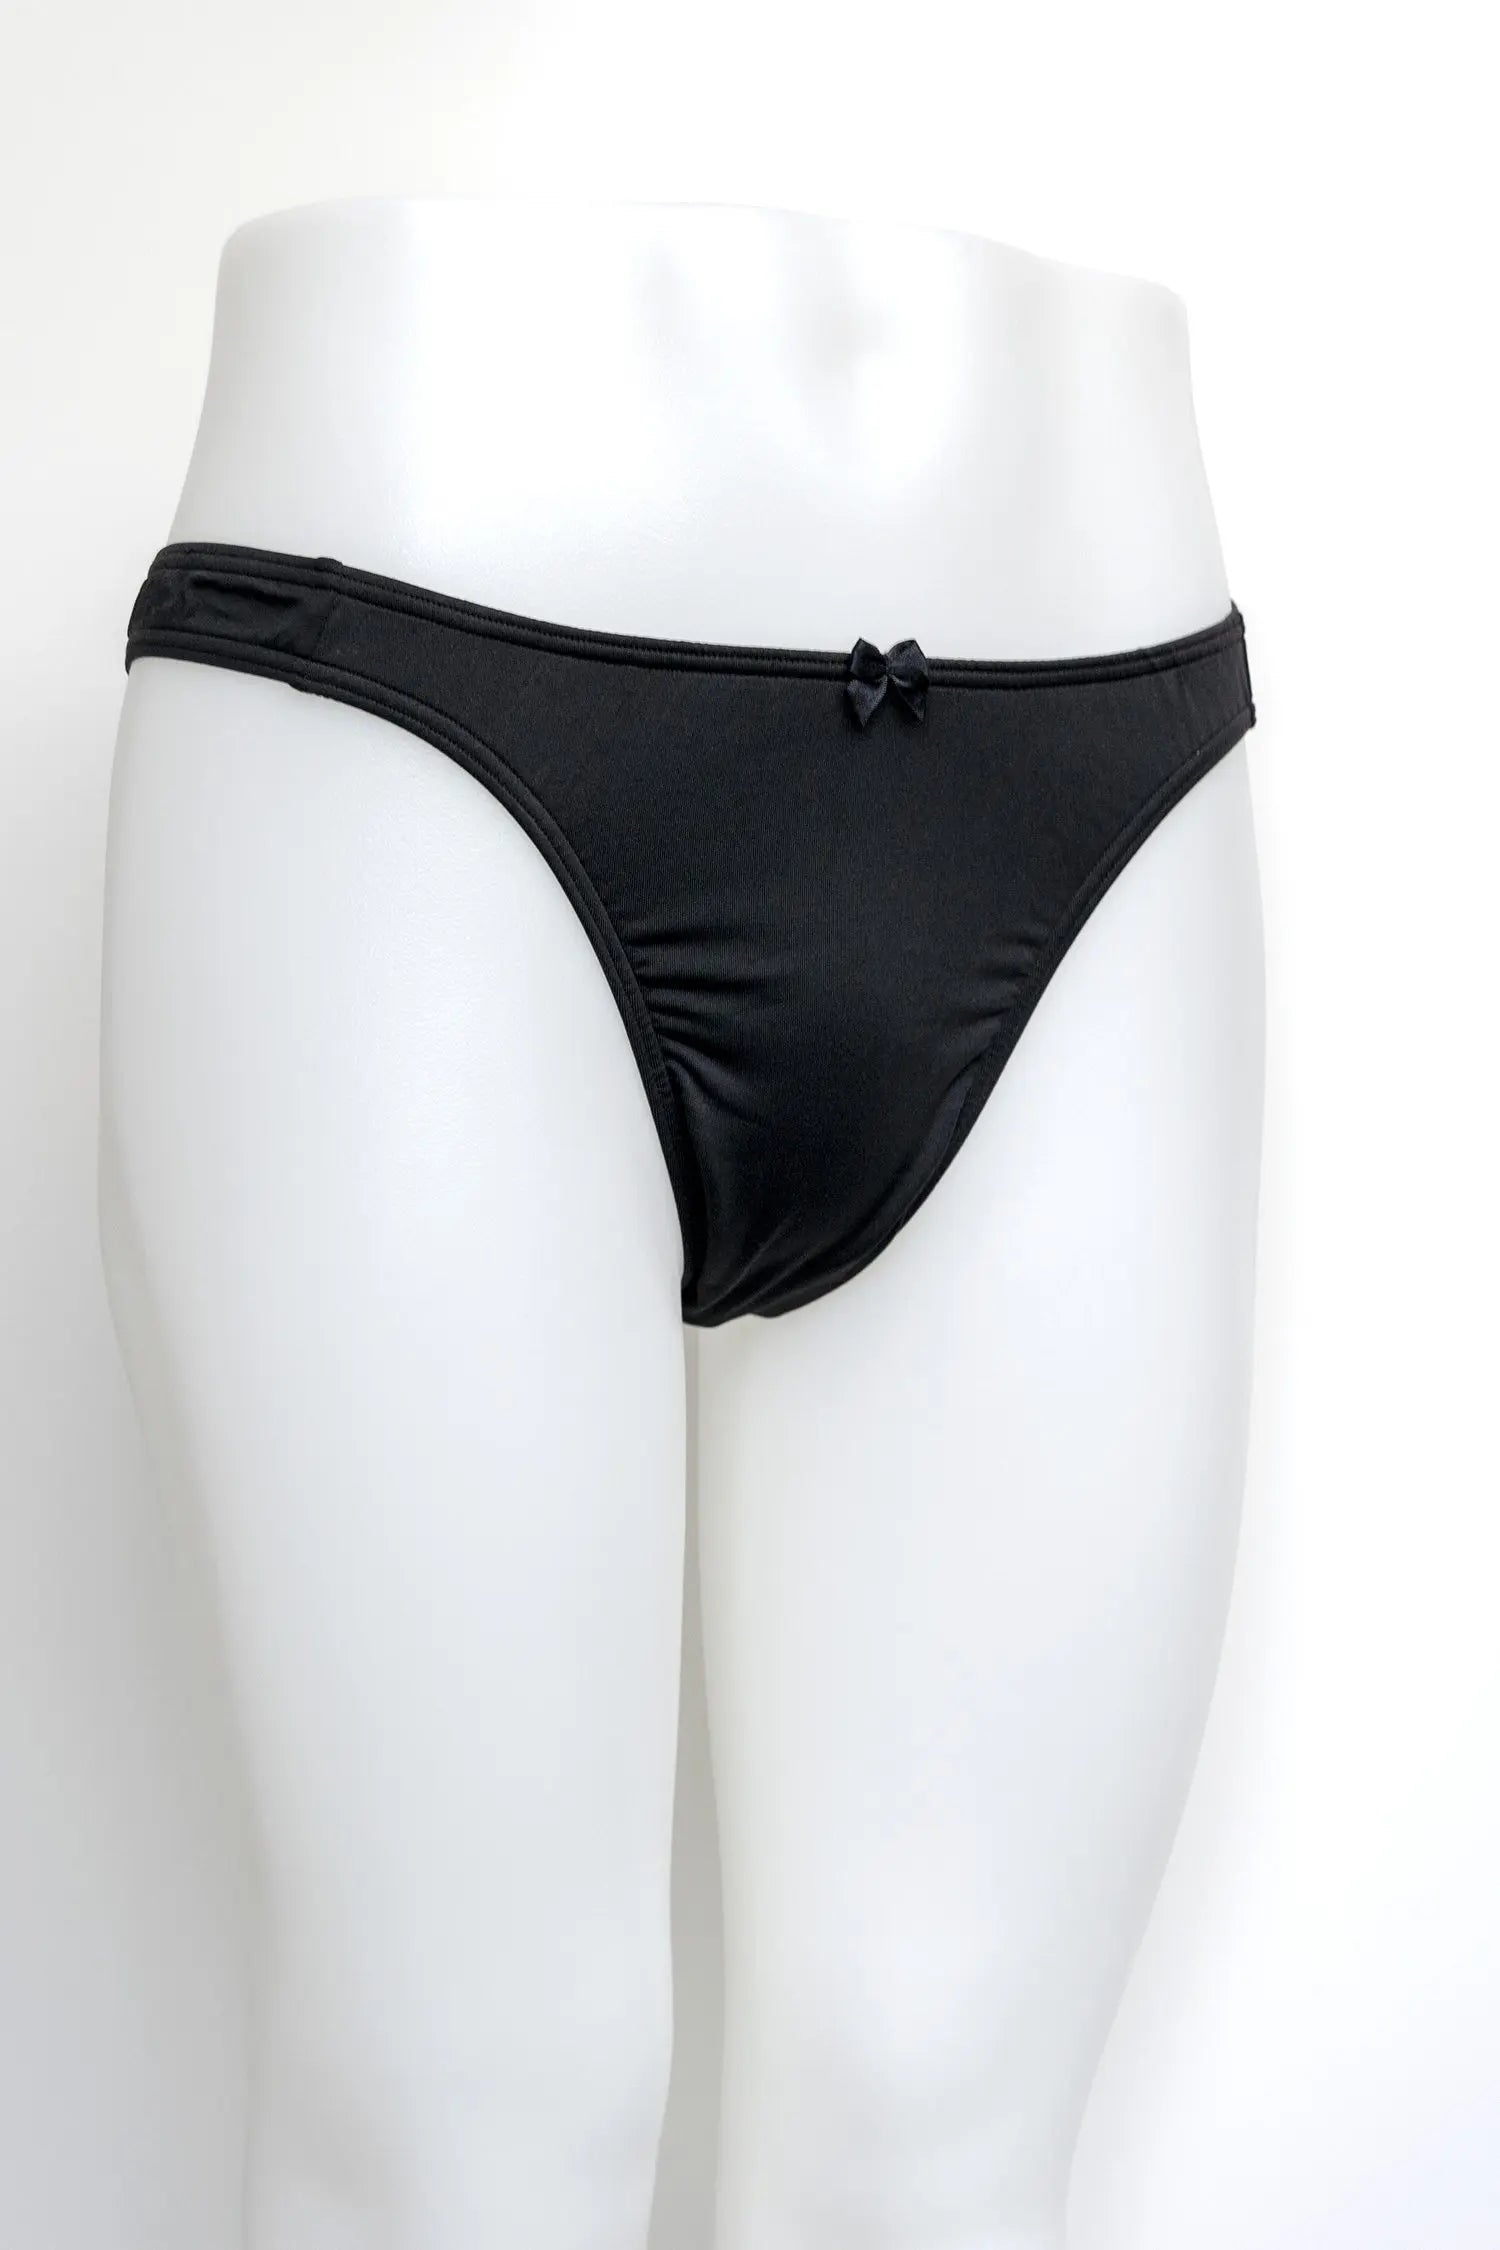 The world's most comfortable tucking underwear panties & gaff